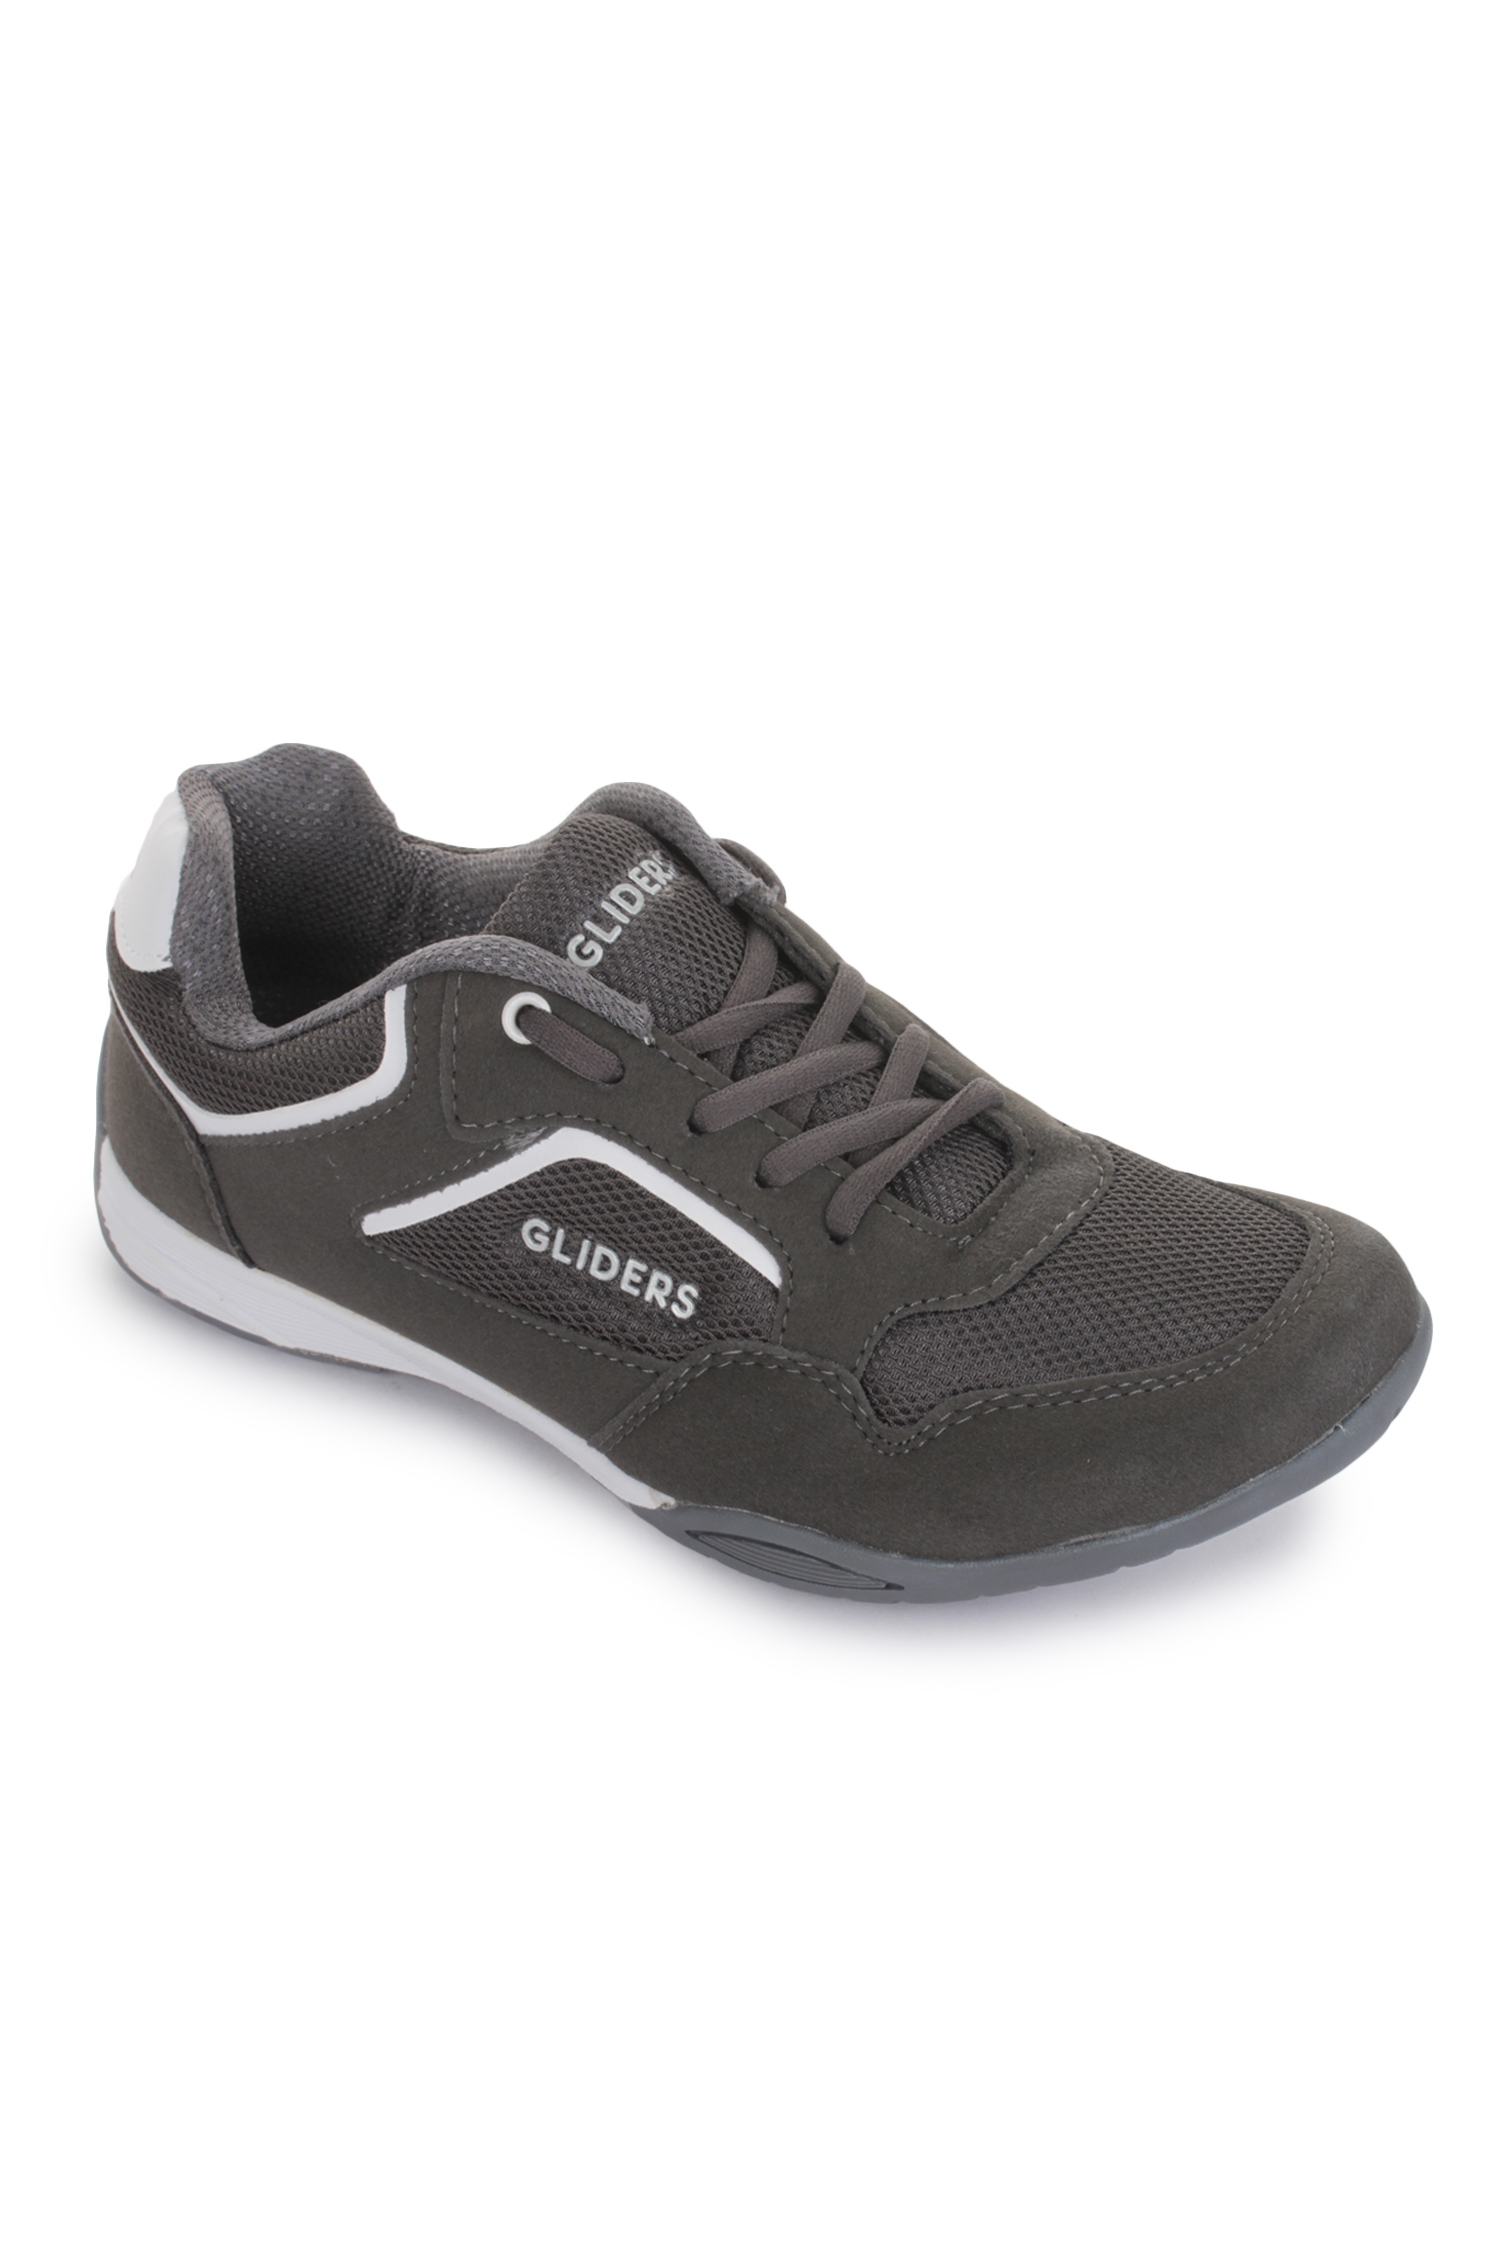 Liberty | Liberty Gliders Grey Sports Running Shoes JERRICO-1_Grey For - Men